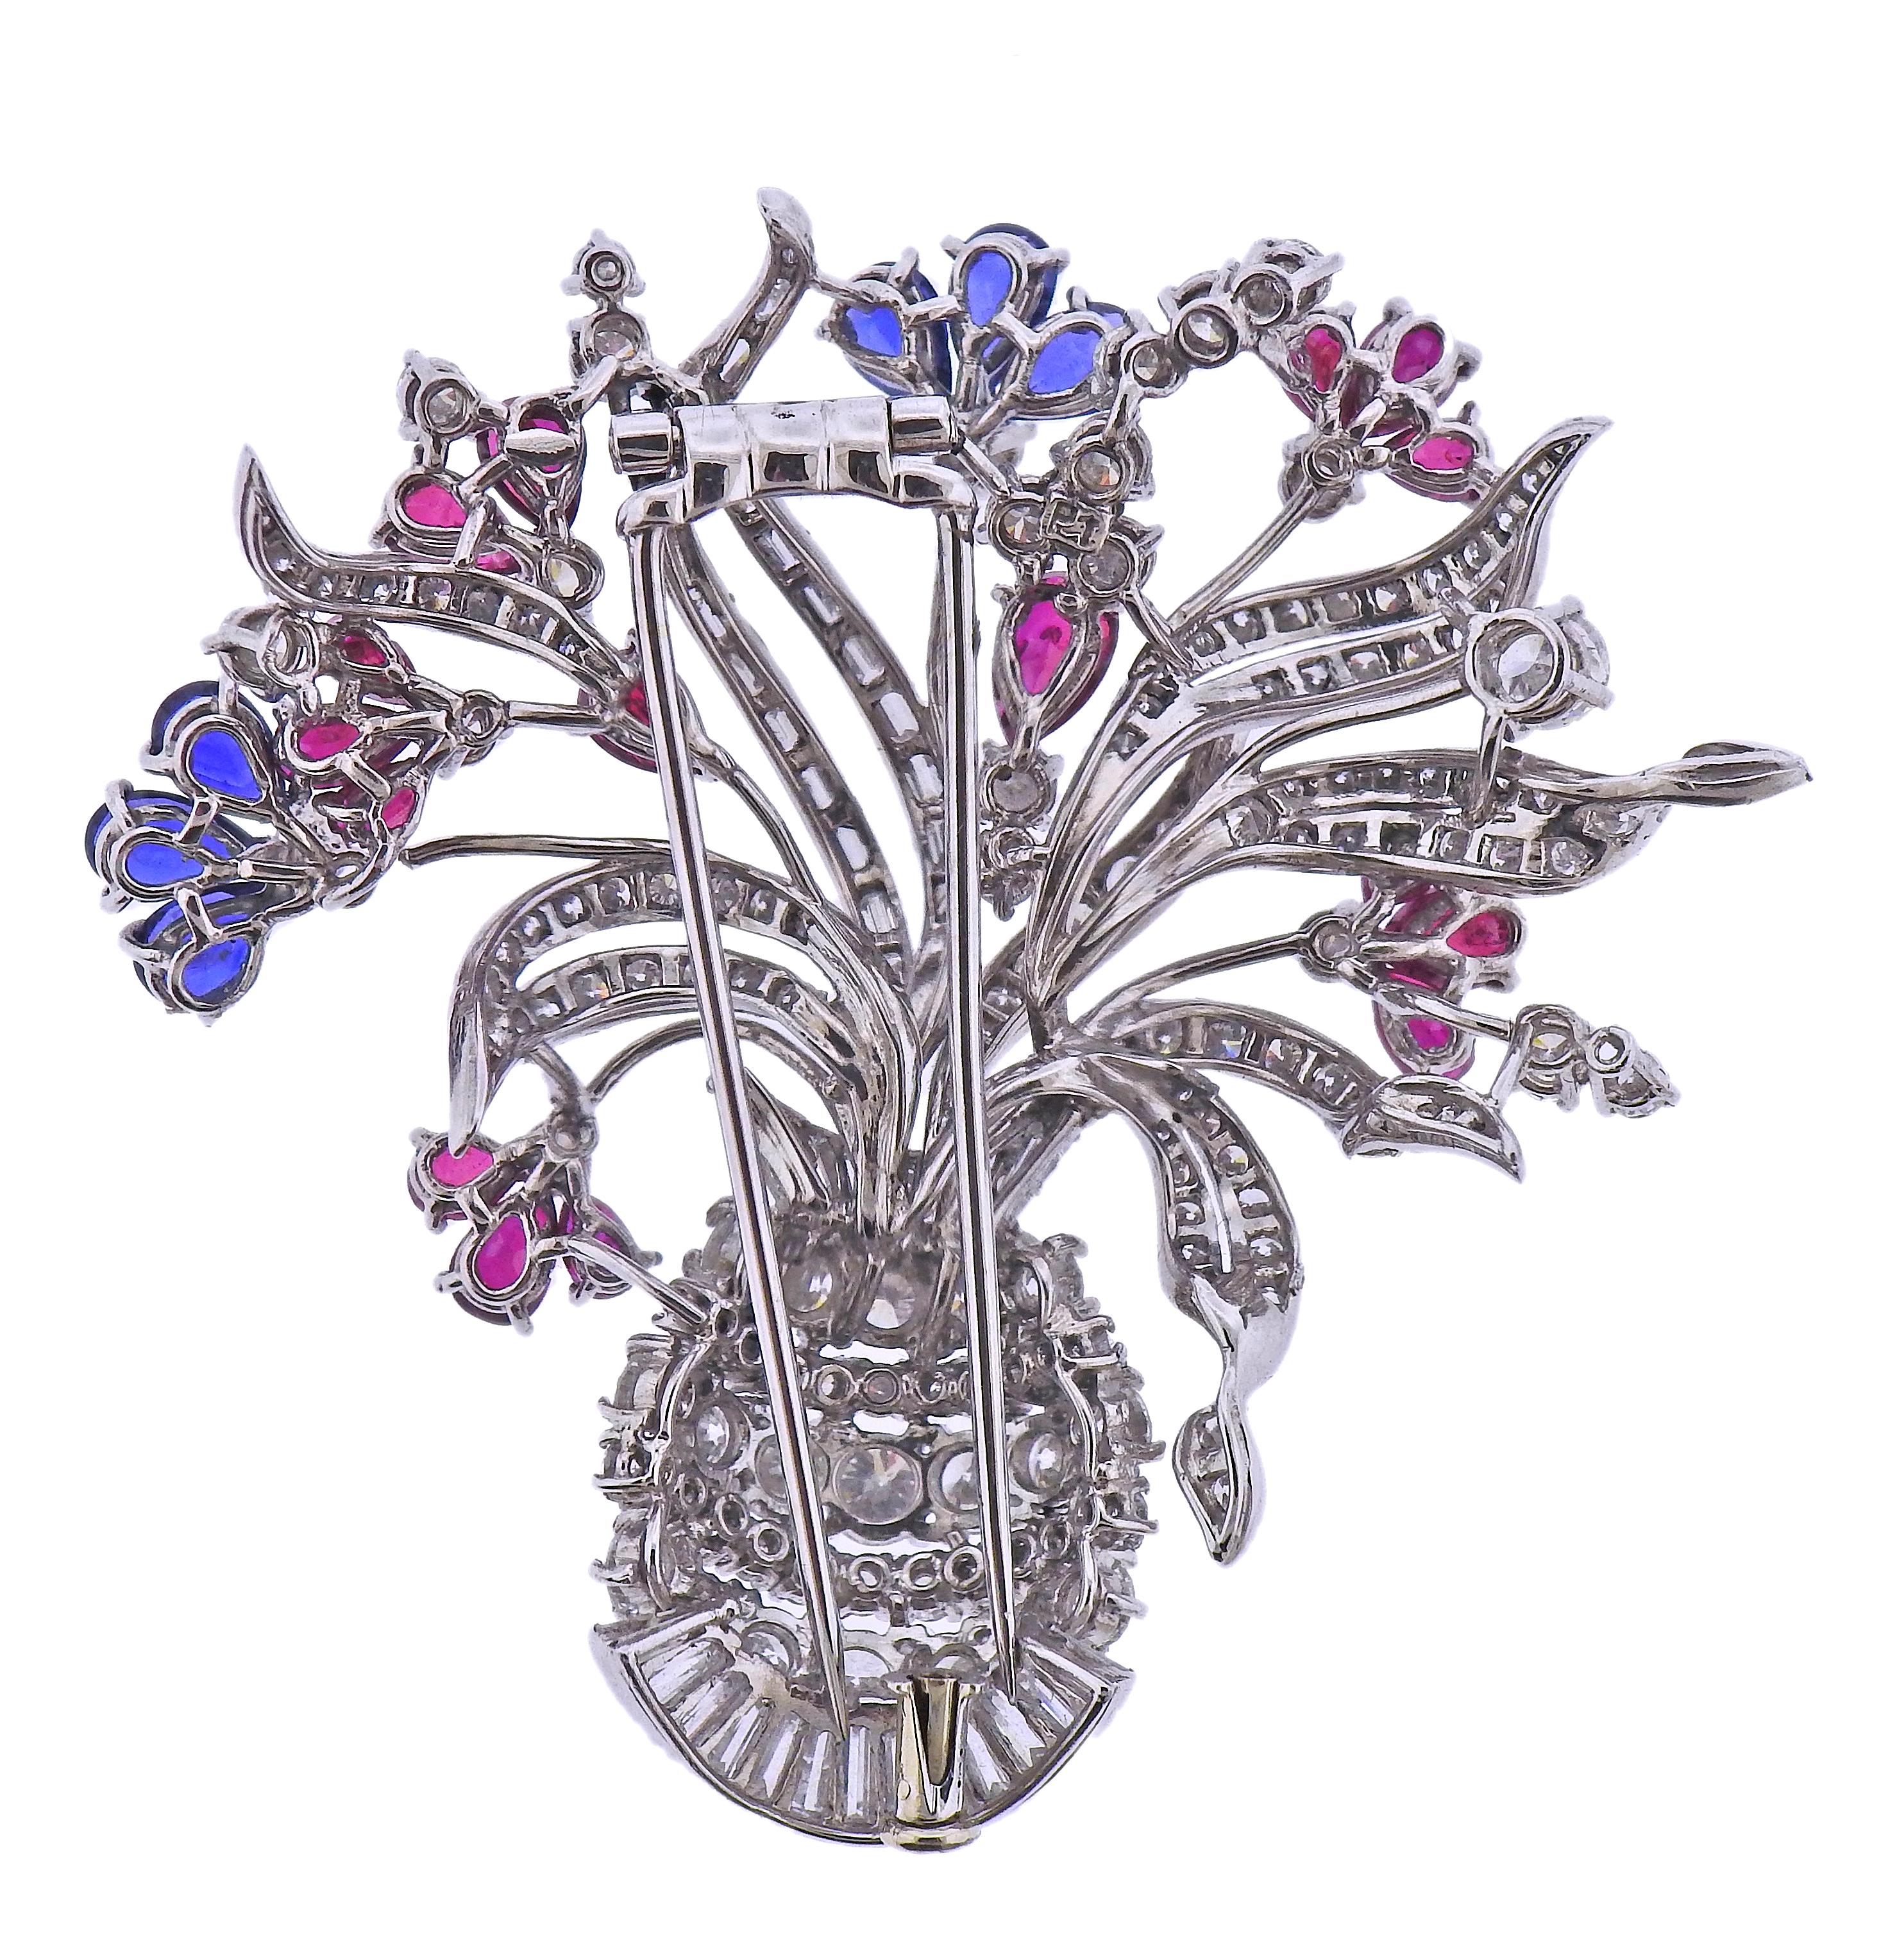 18k white gold flower basket brooch, adorned with vivid sapphires and rubies, as well as approx. 3.50-4.00ctw in diamonds. Brooch measures 2